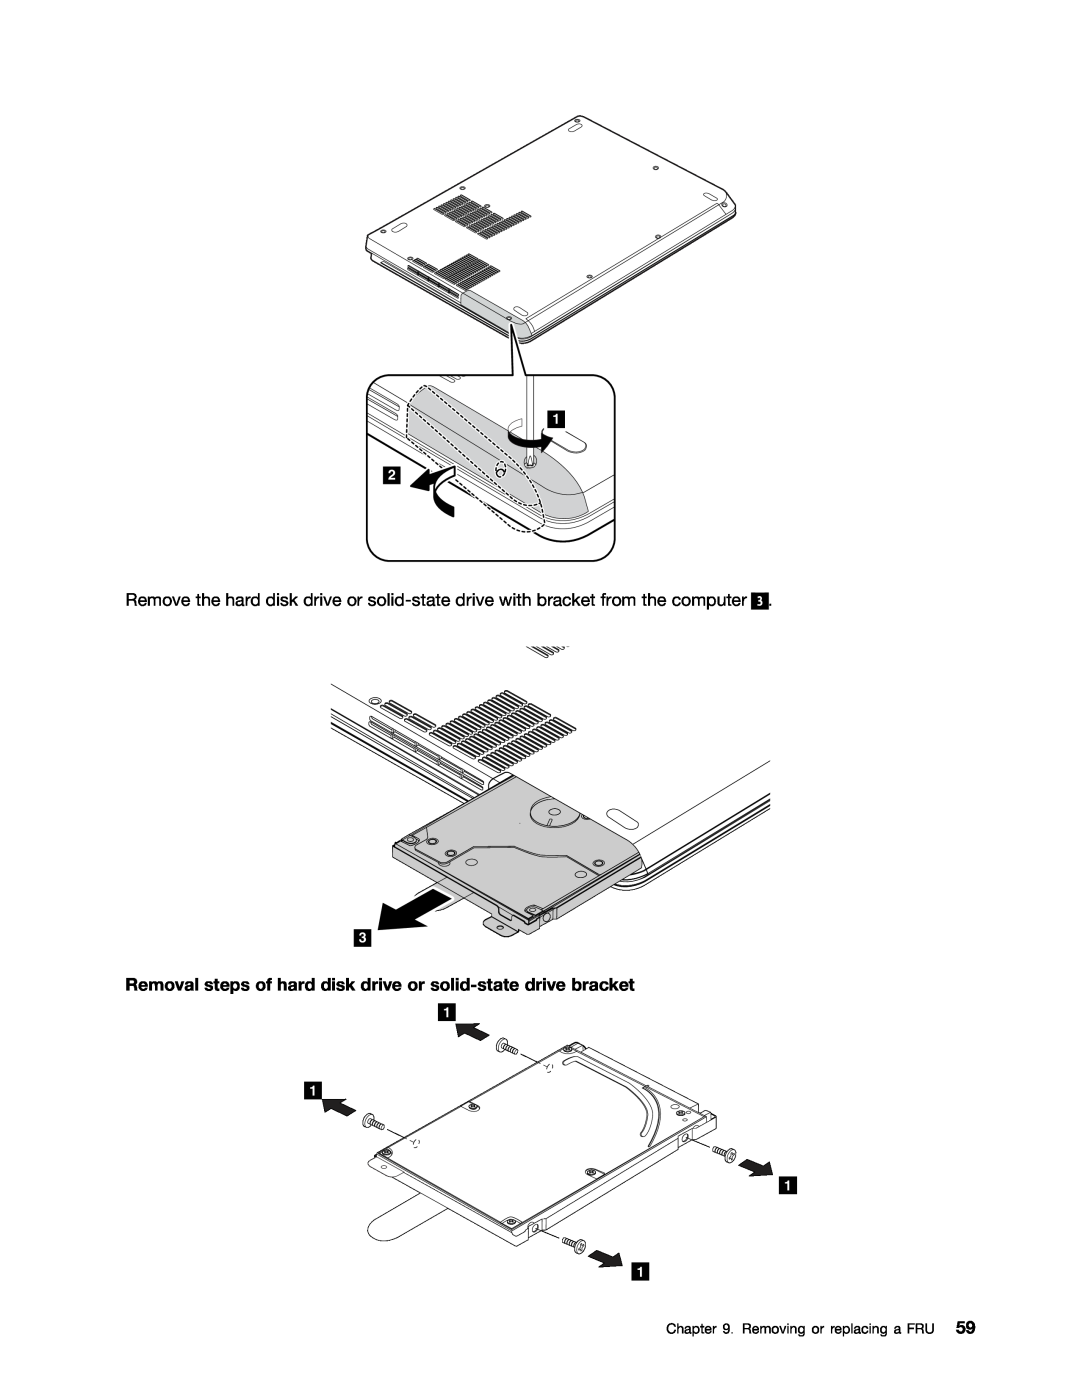 Lenovo 33472YU, S230U manual Removal steps of hard disk drive or solid-state drive bracket, Removing or replacing a FRU 